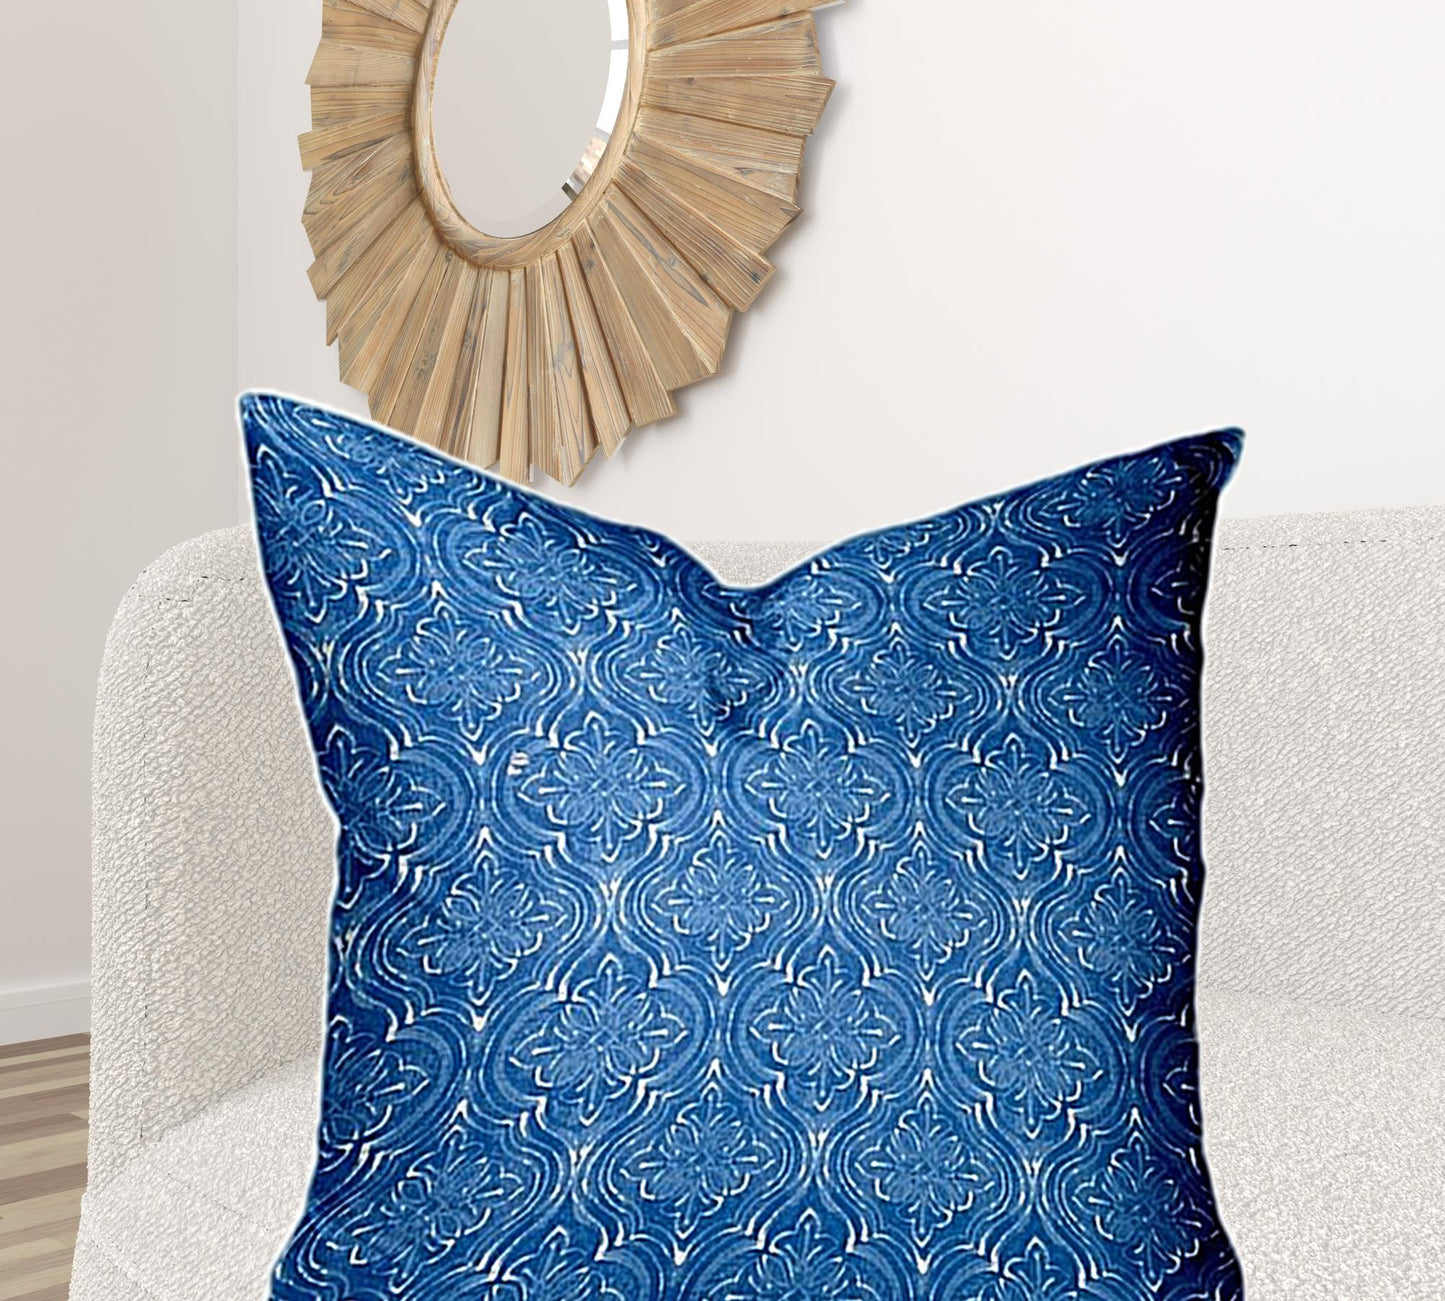 36" X 36" Blue And White Zippered Ikat Throw Indoor Outdoor Pillow